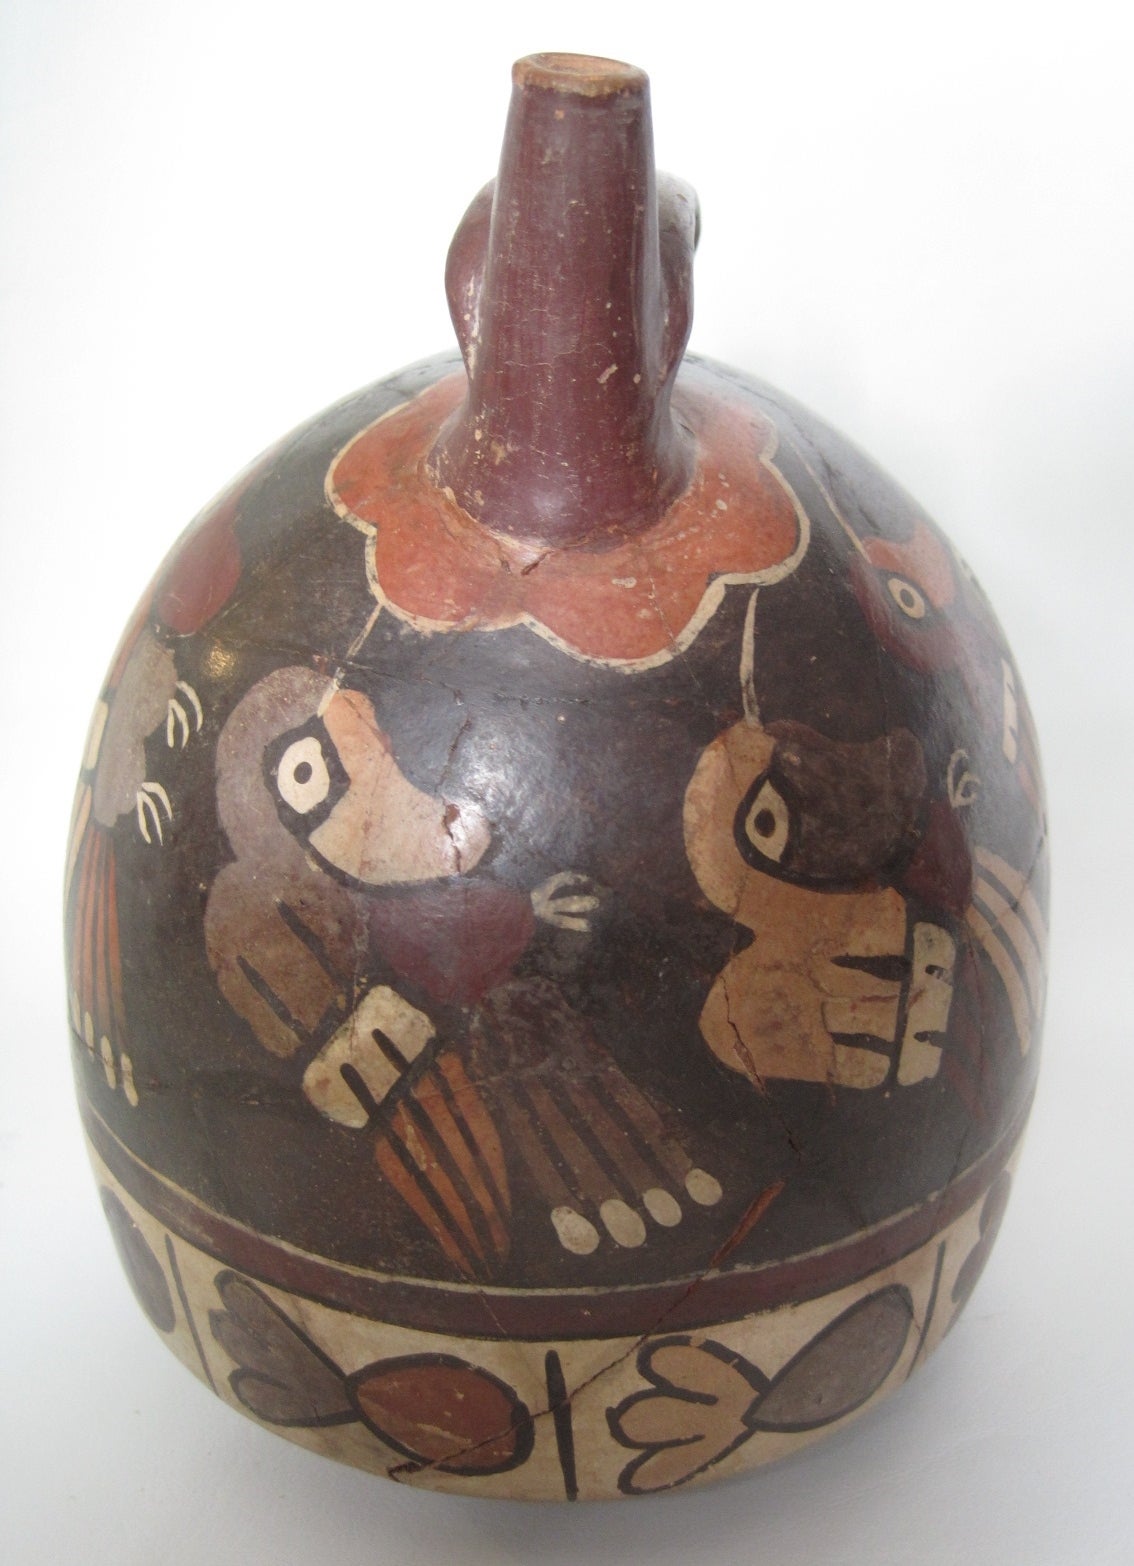 Pre-Columbian Nazca Polychromed pottery vessel, circa 100 B.C.

Double spout and bridge pottery vessel. The exterior is painted in red, orange, light pink, grey, crimson, white and brown, and depict a repeating motif of a multicolored bird with